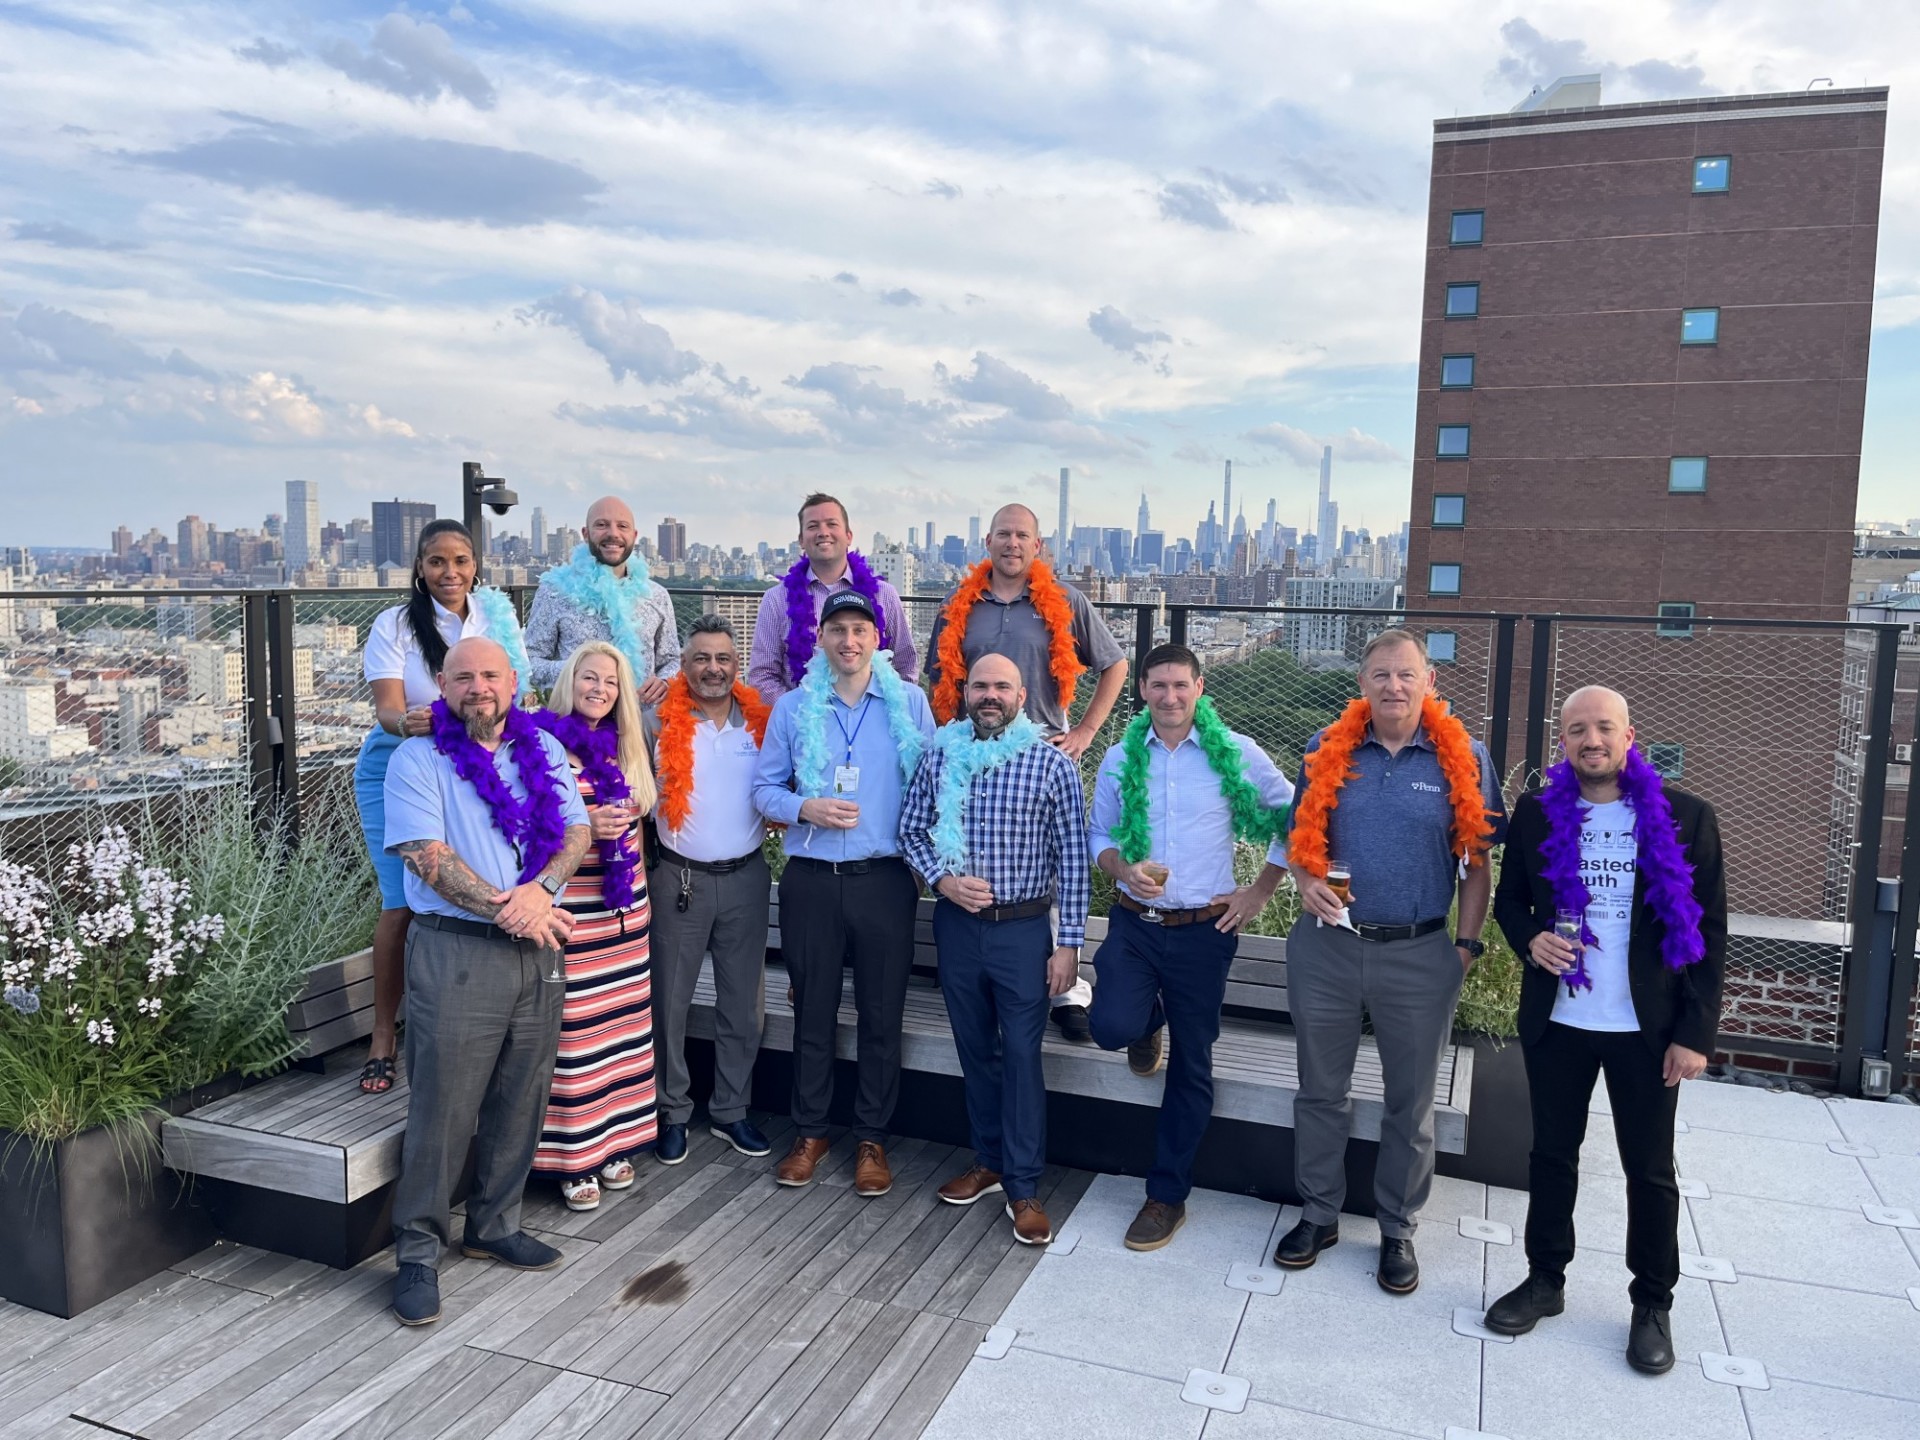 The conference attendees wear colorful leis around their necks while posing on a rooftop, Manhattan in the background